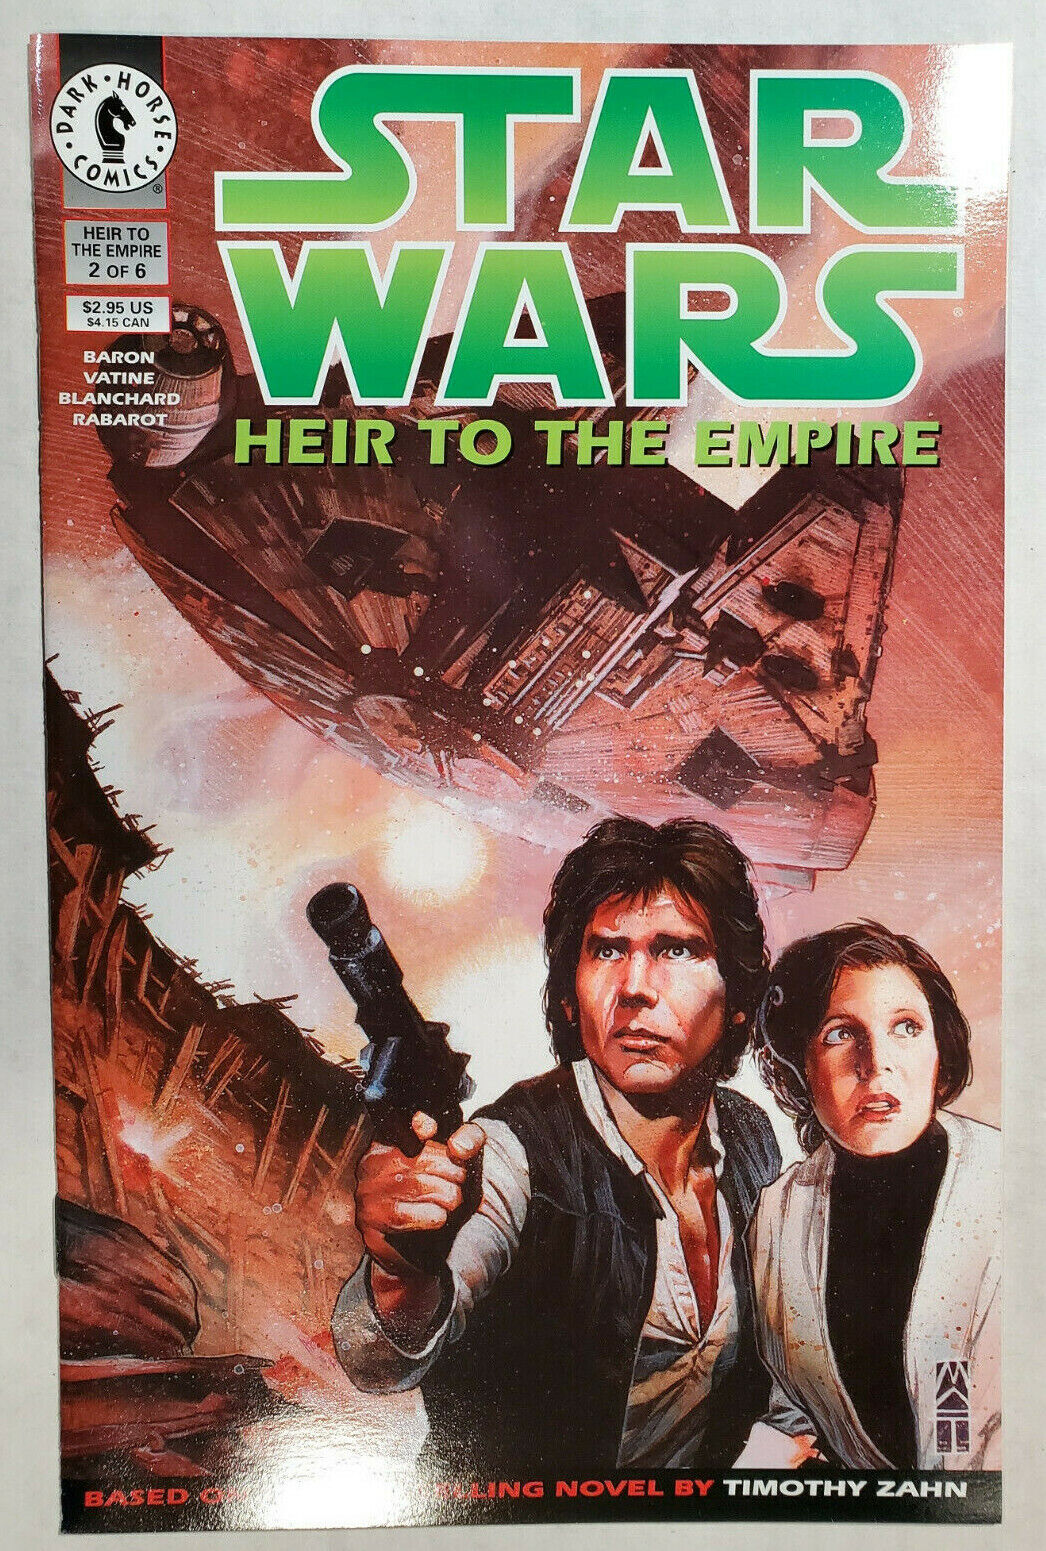 Star Wars: Heir to the Empire #2 